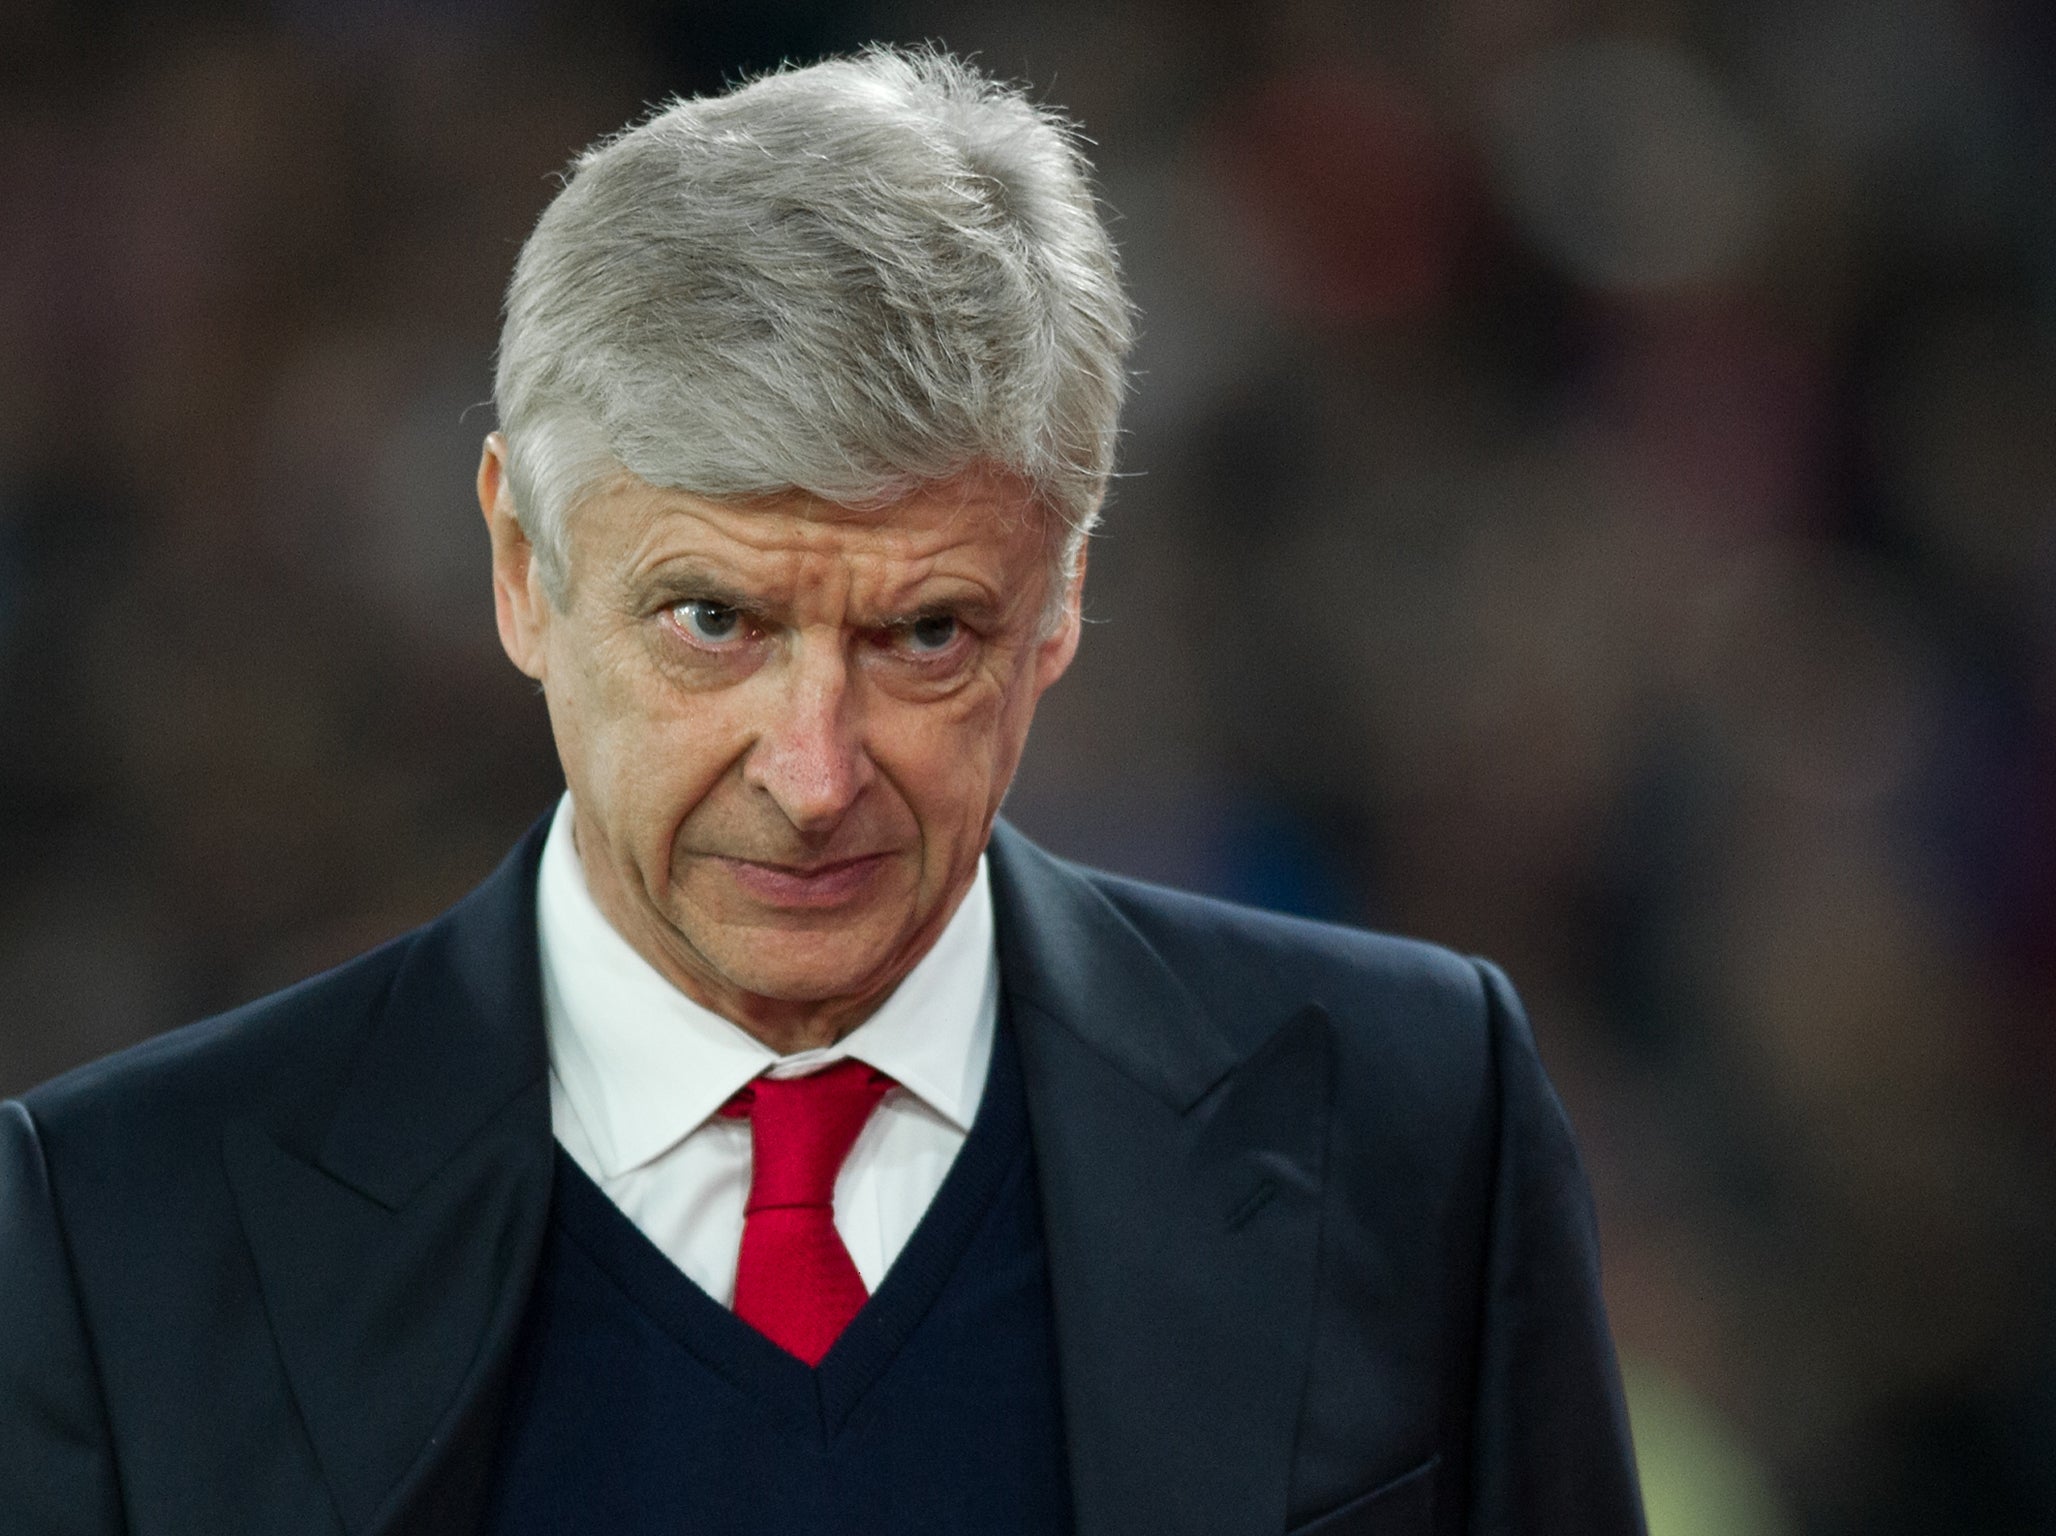 Wenger signed a new two-year contract extension at the end of last season